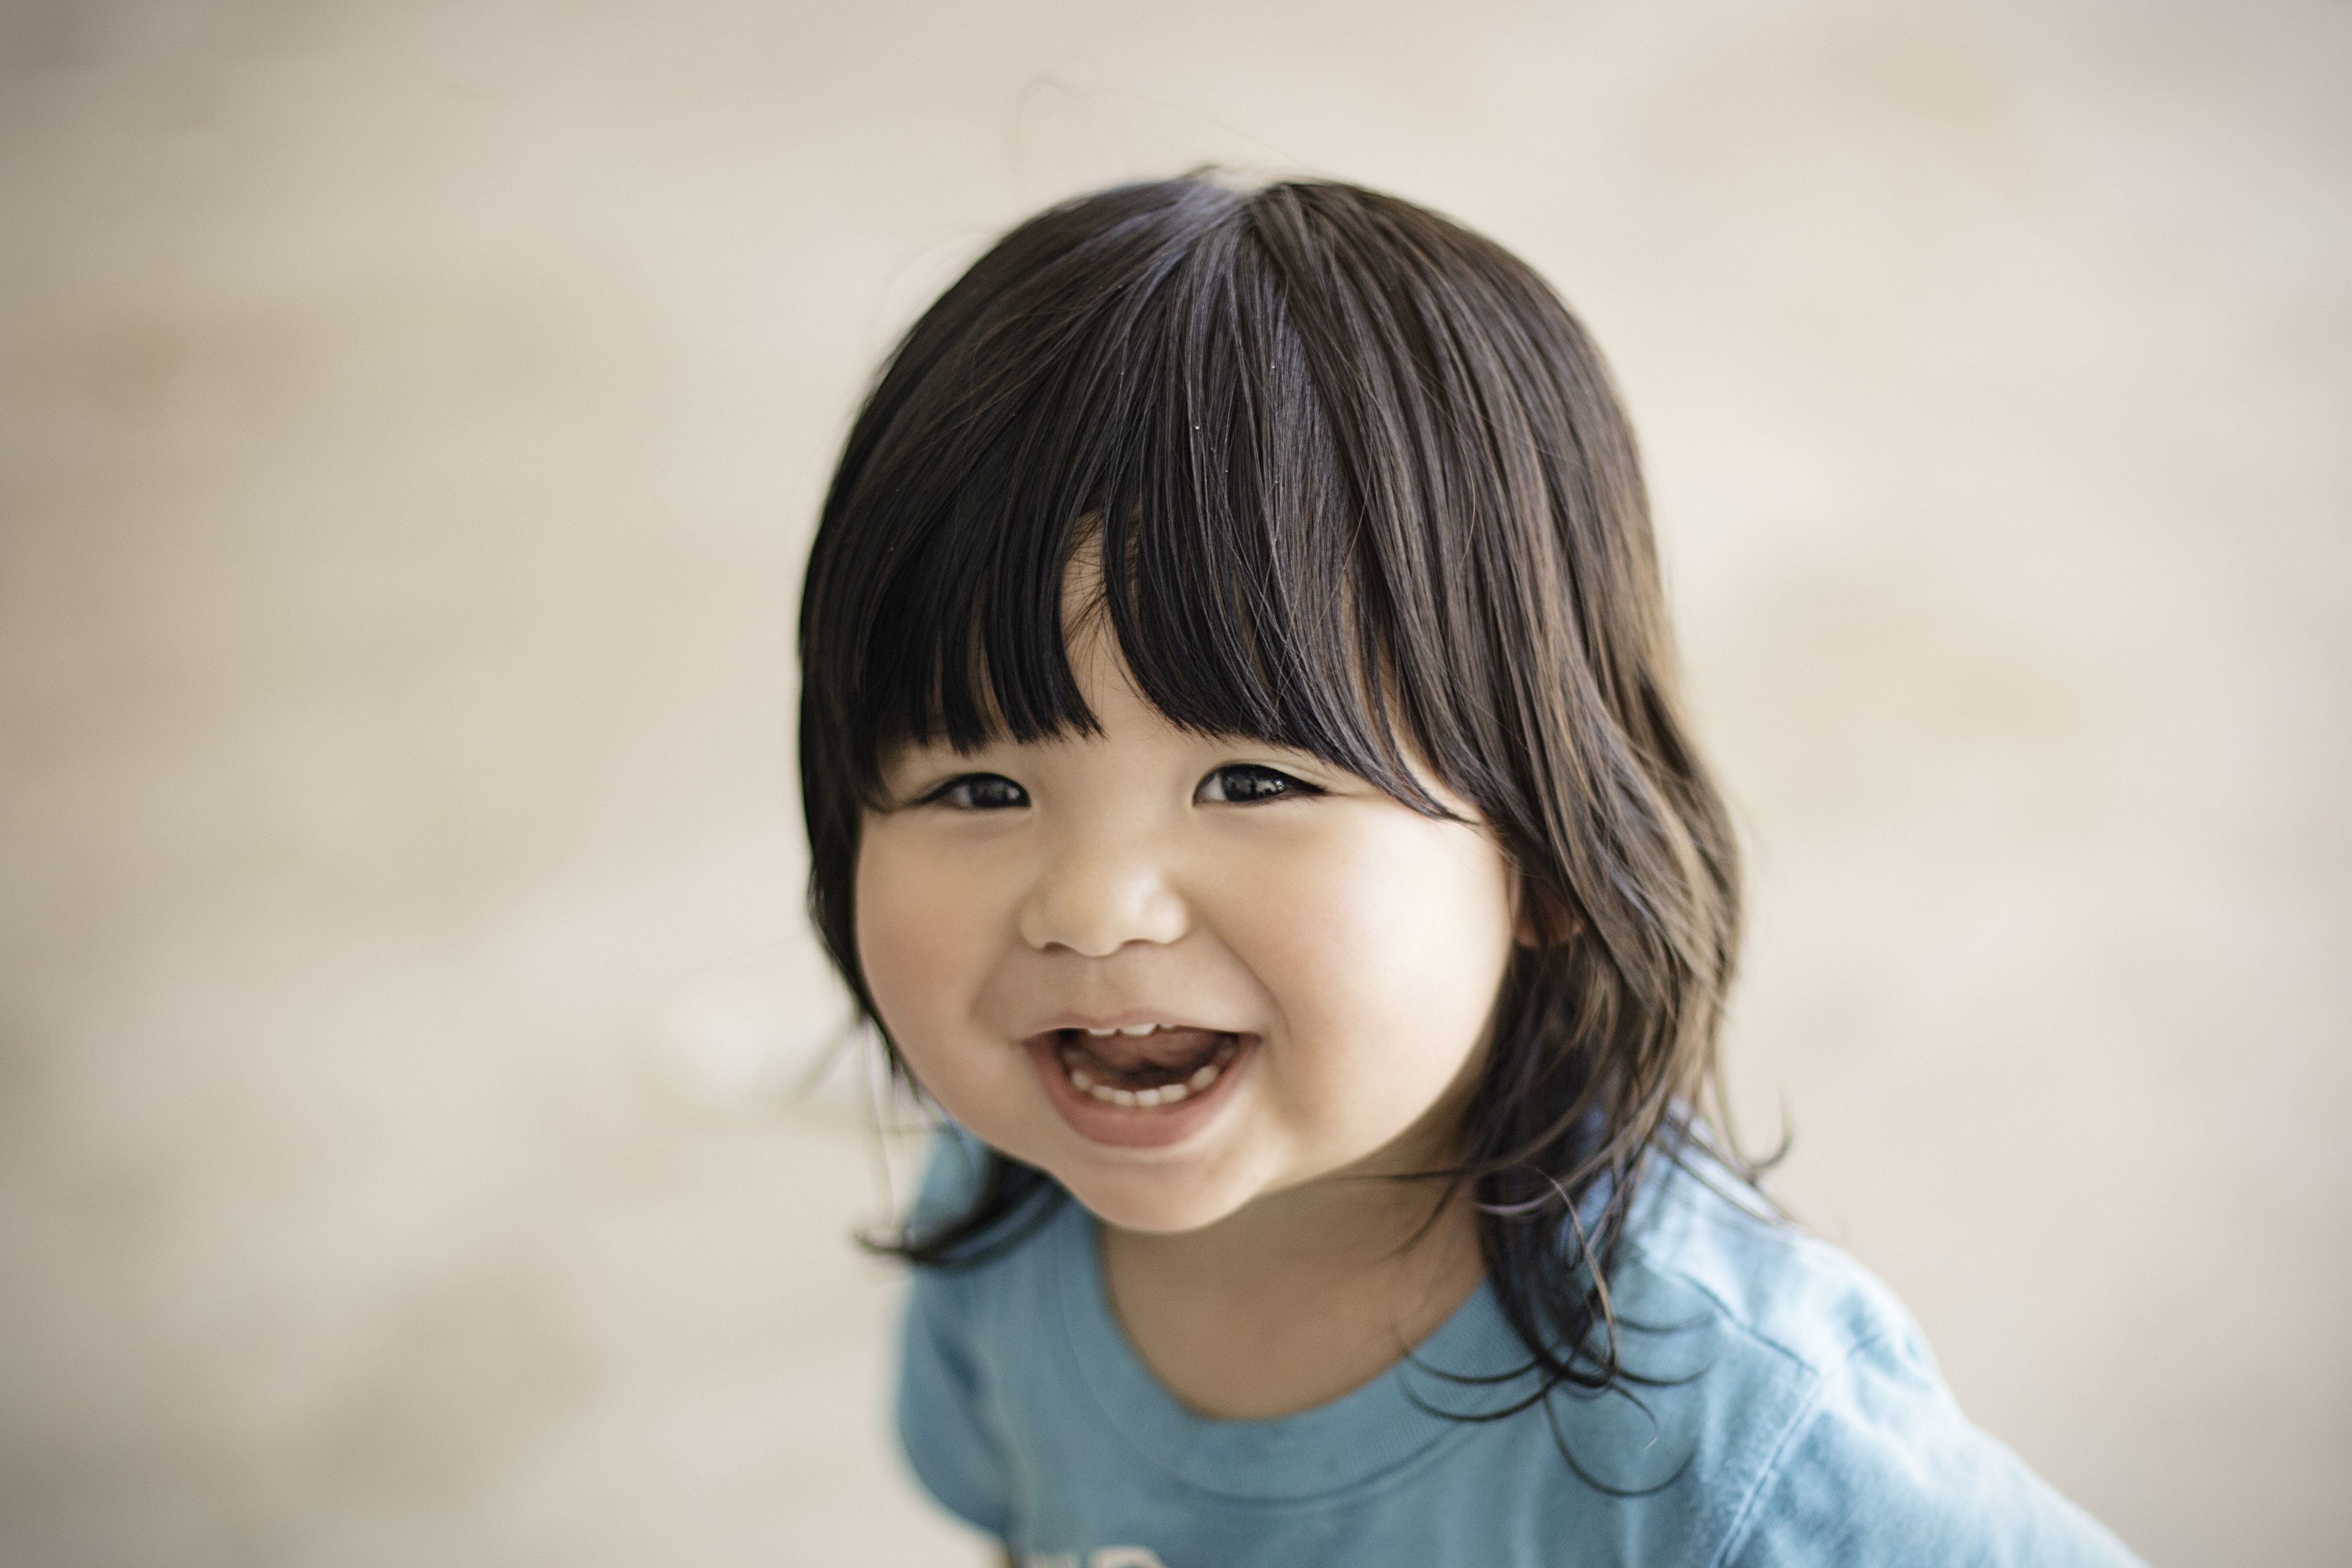 baby #smiling #child #cute #kid #childhood #happy 4k wallpaper and ...